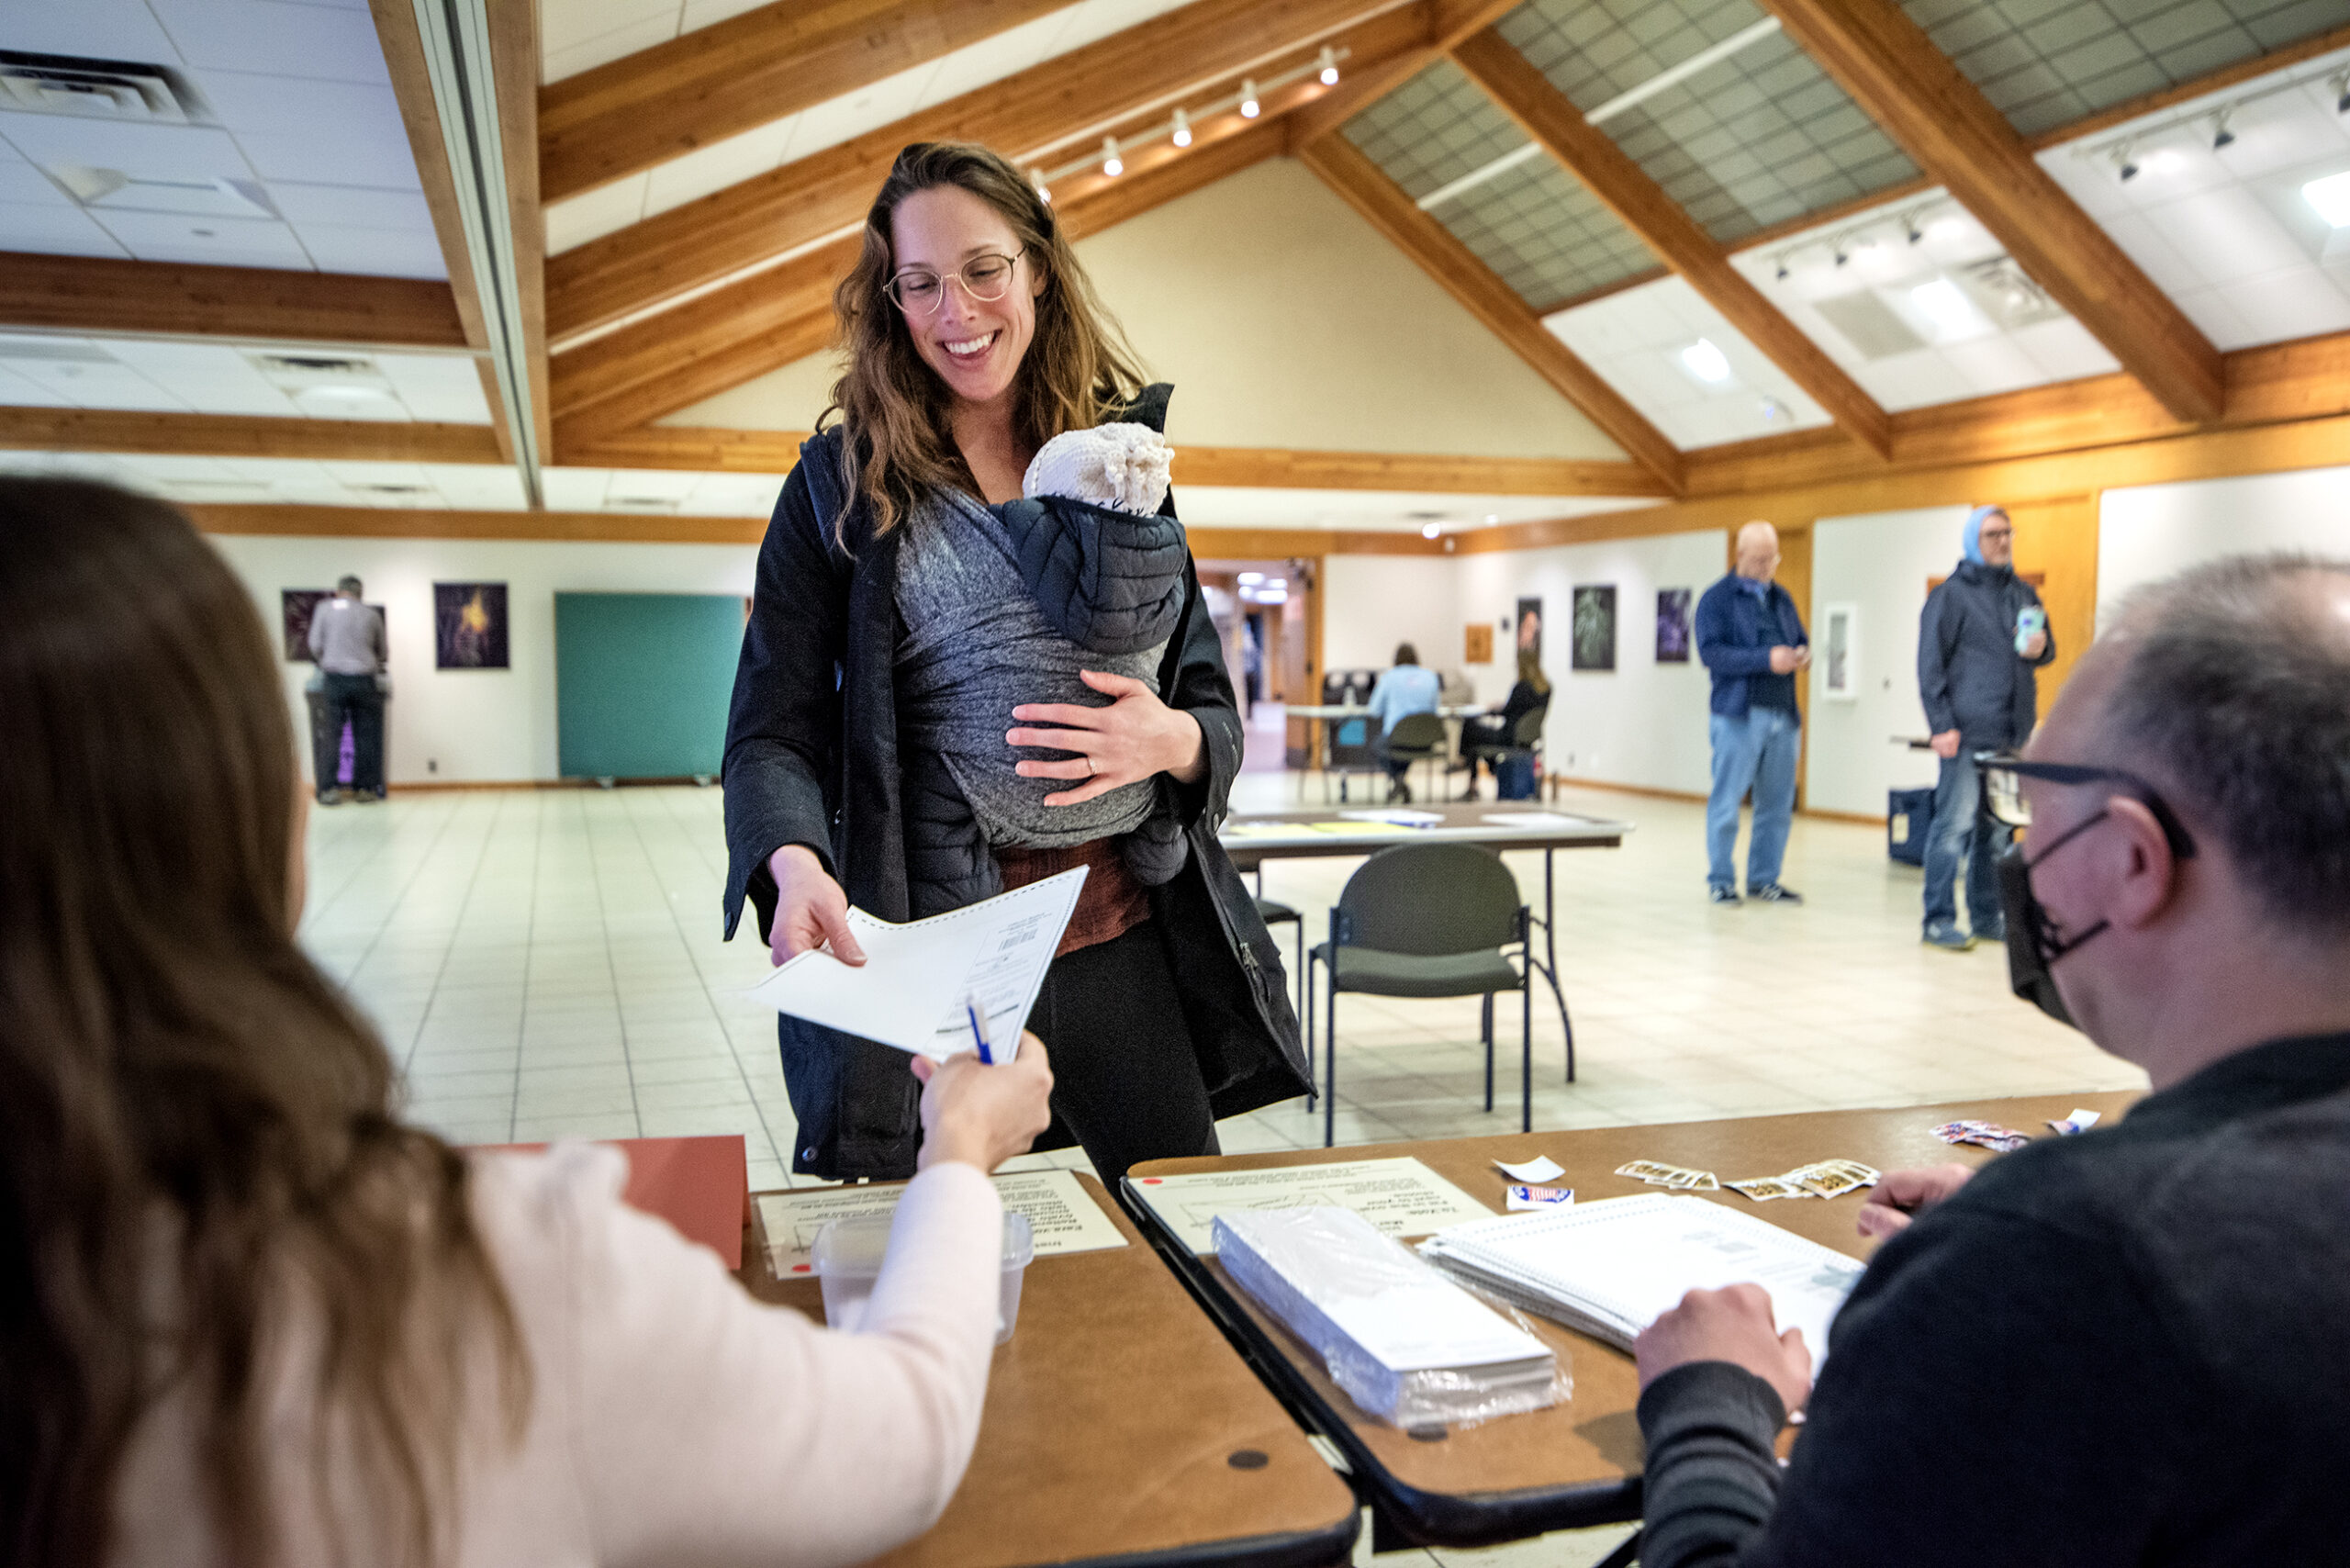 ‘A long time coming’: Wisconsin voters ready to cast their ballots in spring election